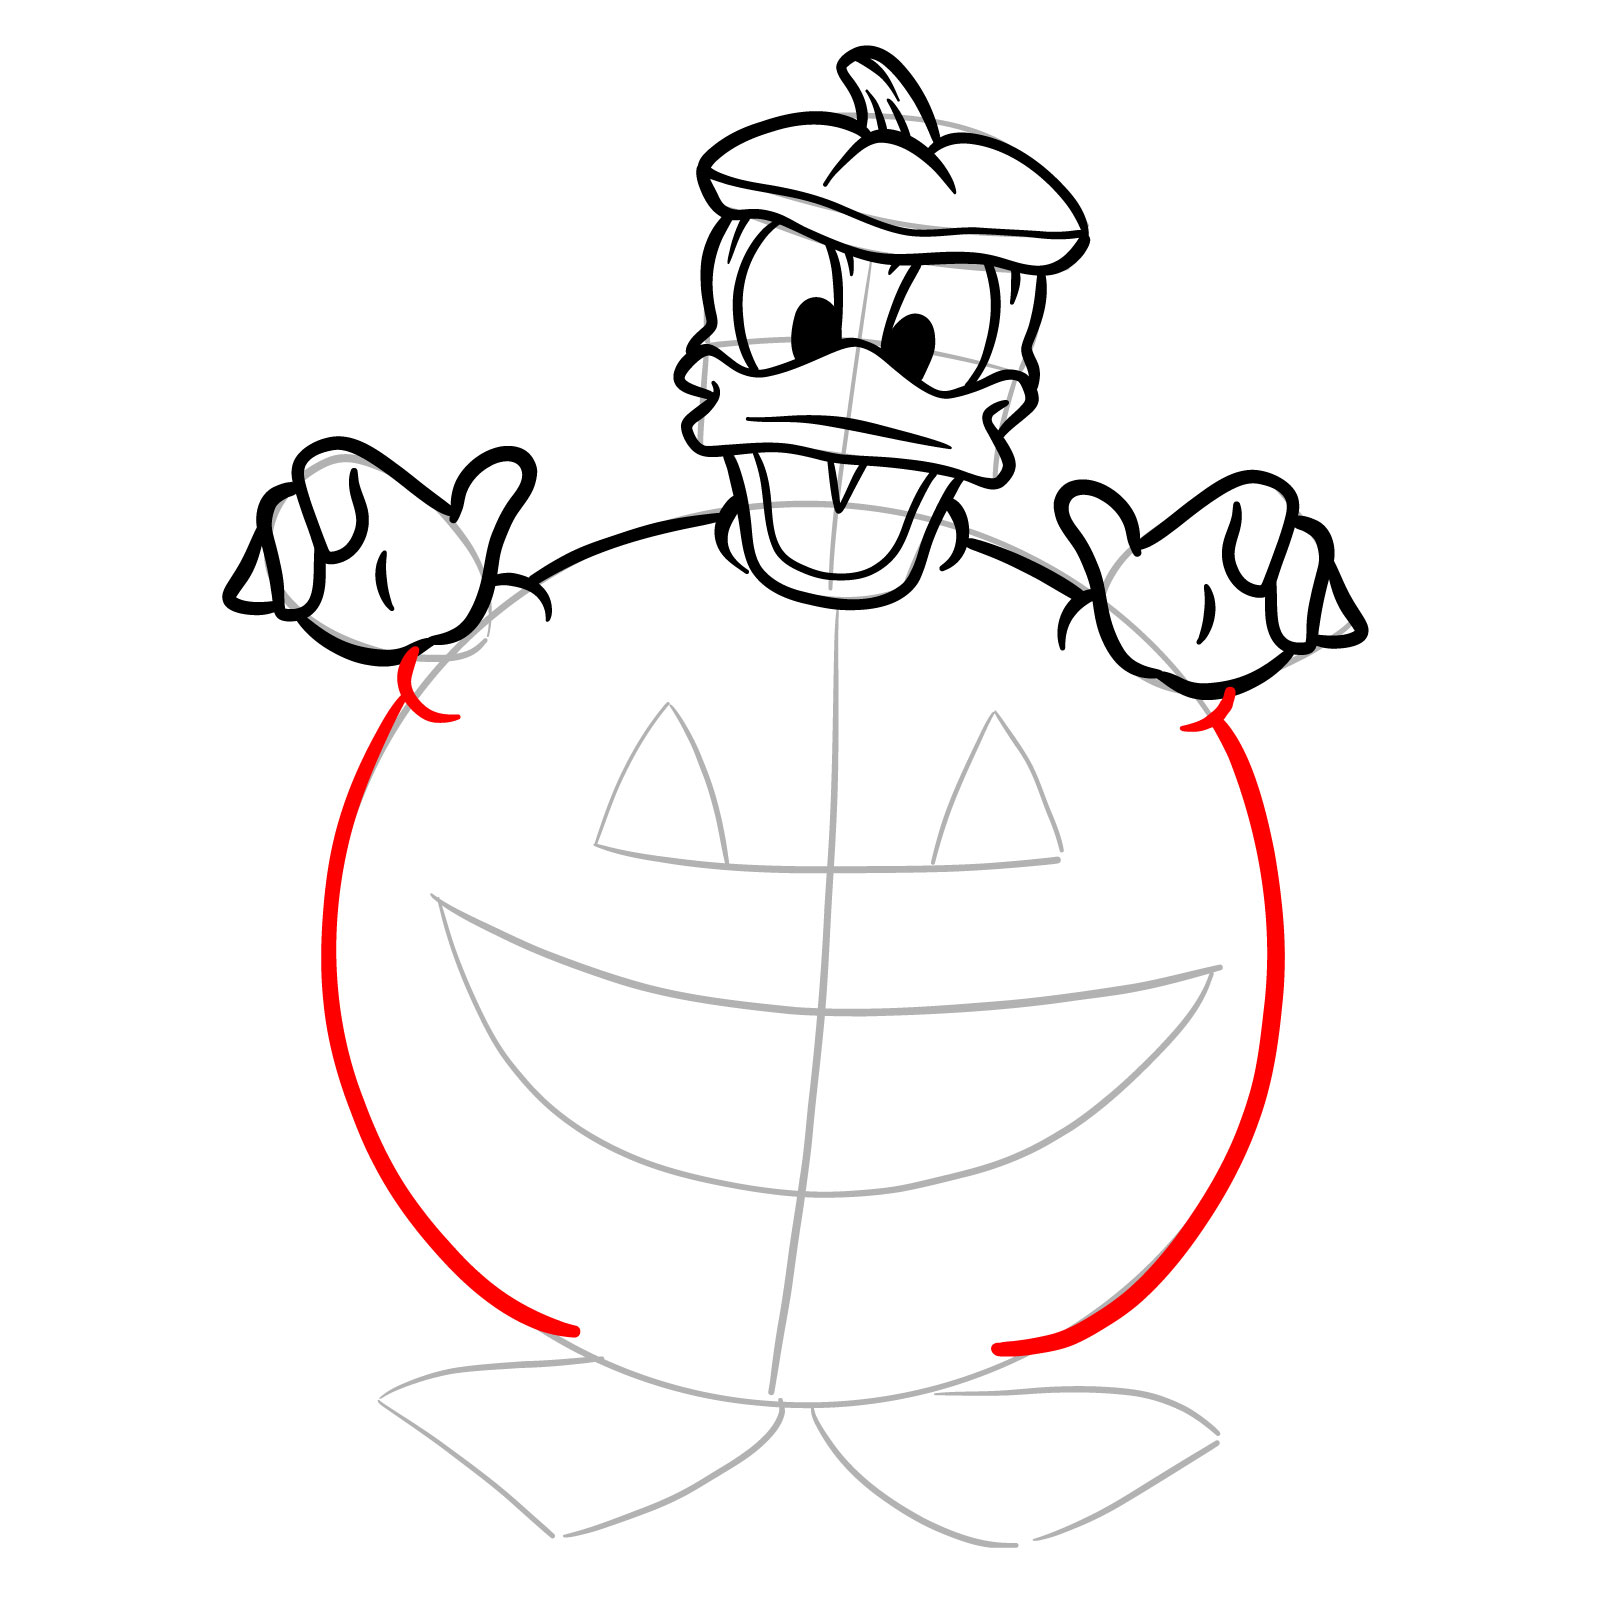 How to draw Halloween Donald Duck in a jack o'lantern - step 17